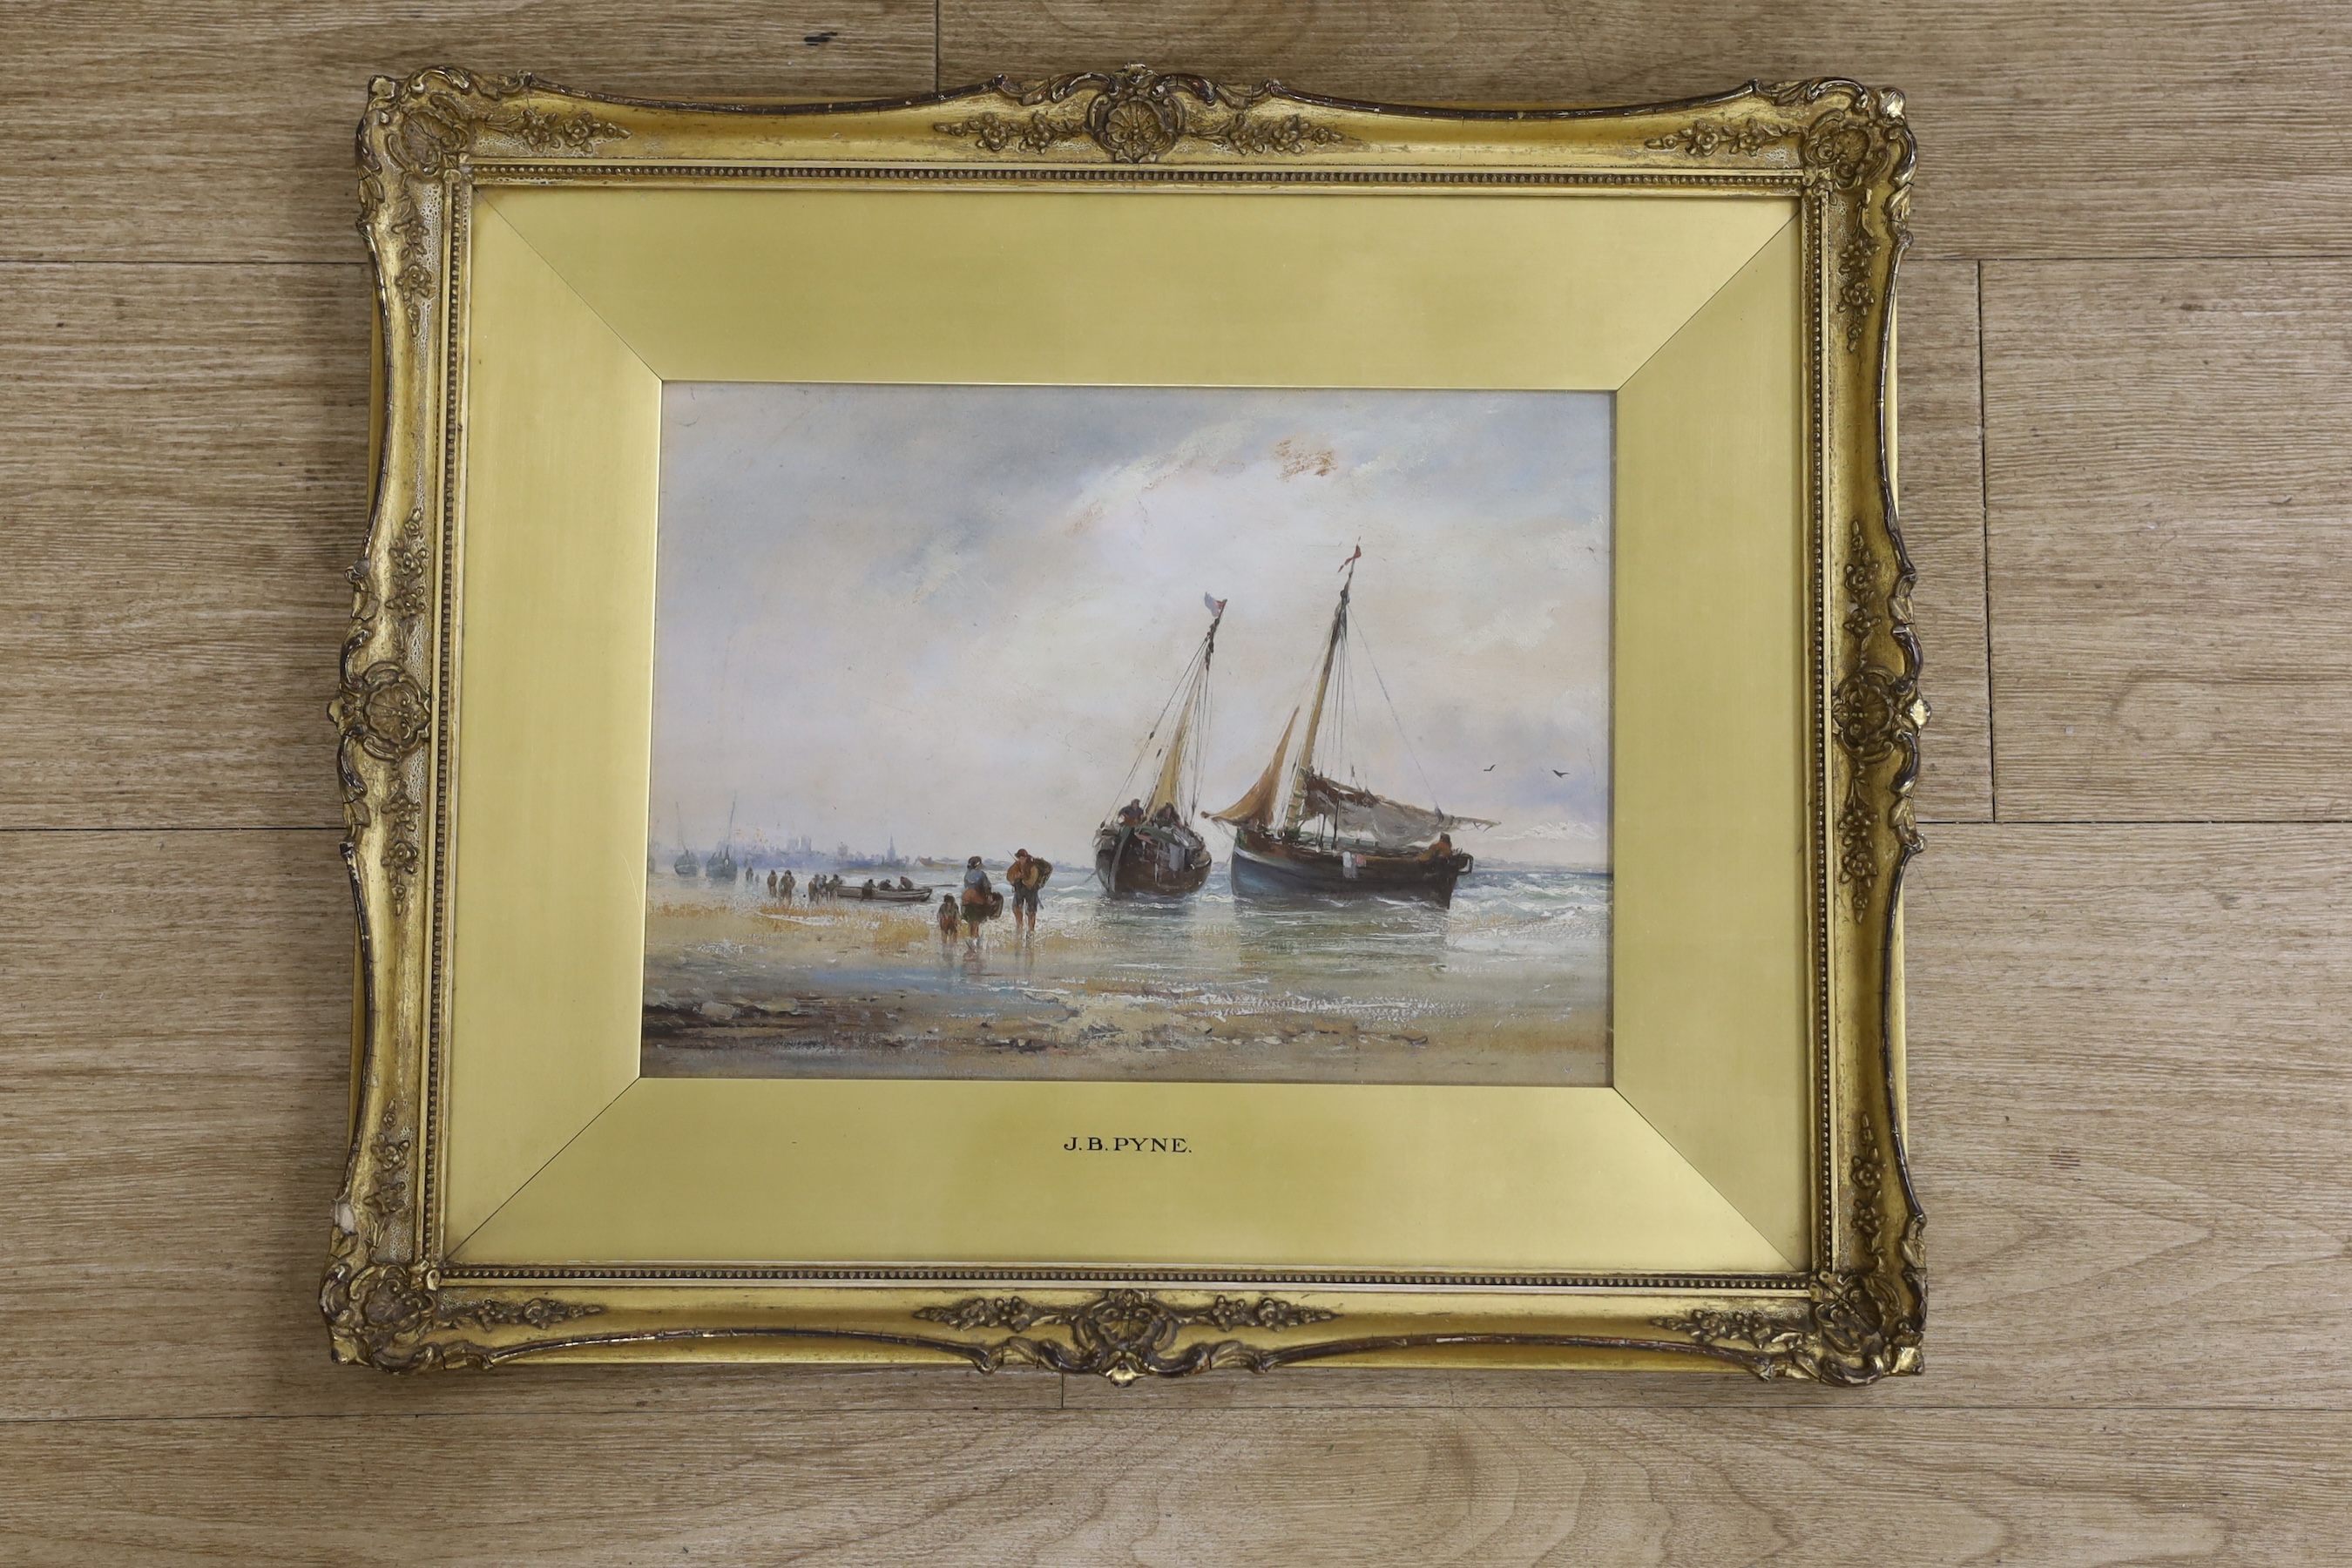 Attributed to James Baker Pyne (1800-1870), oil on board, Beached fishing boats and figures at low tide, unsigned, inscribed to the mount, 21 x 29cm, ornate gilt framed